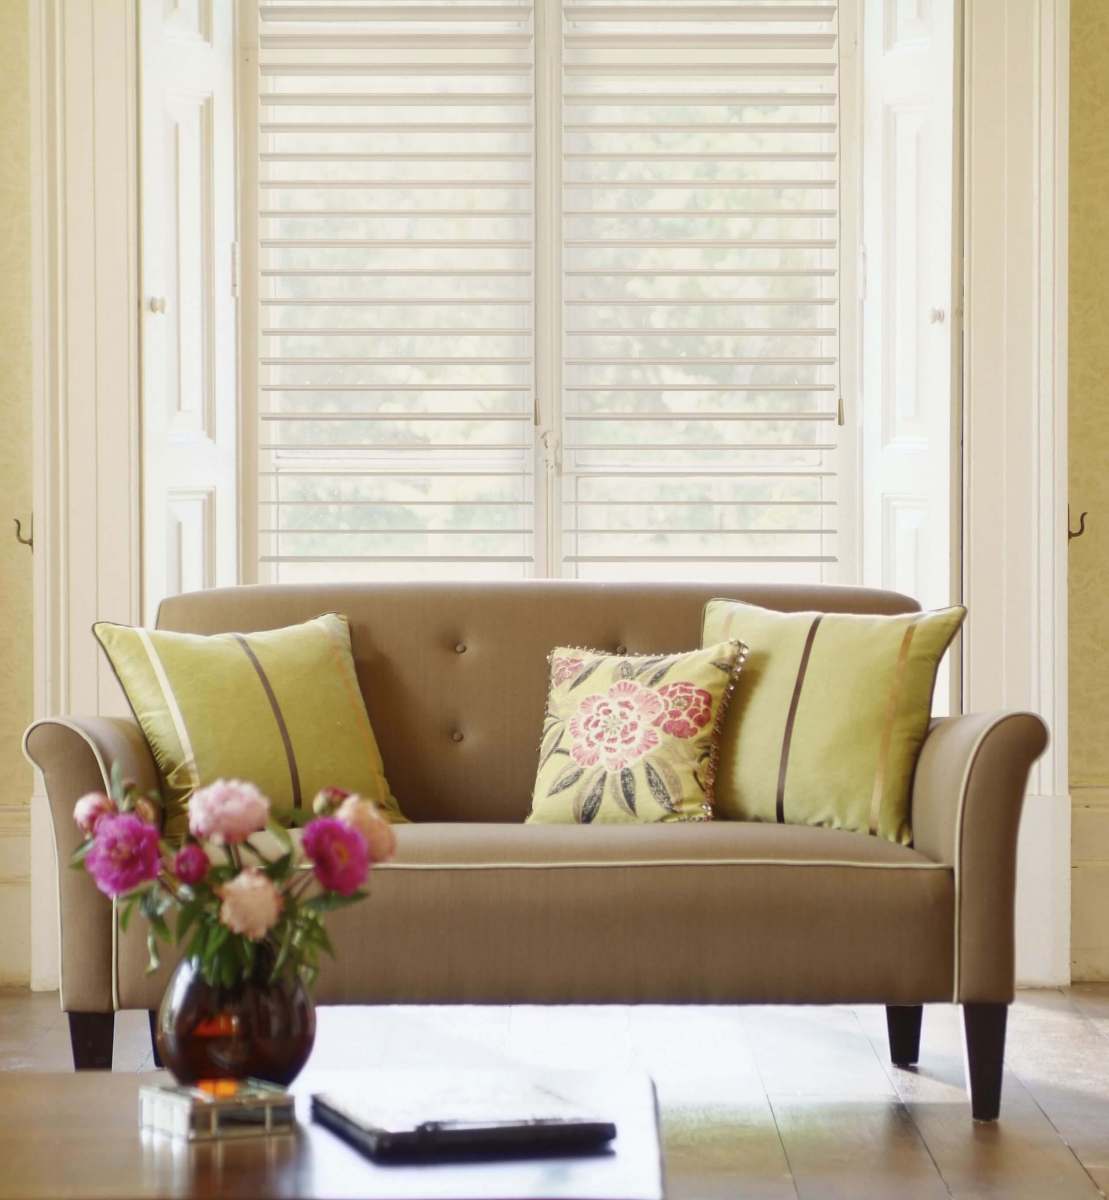 Timberblind Chapel Hill NC Window Blinds And Shutters